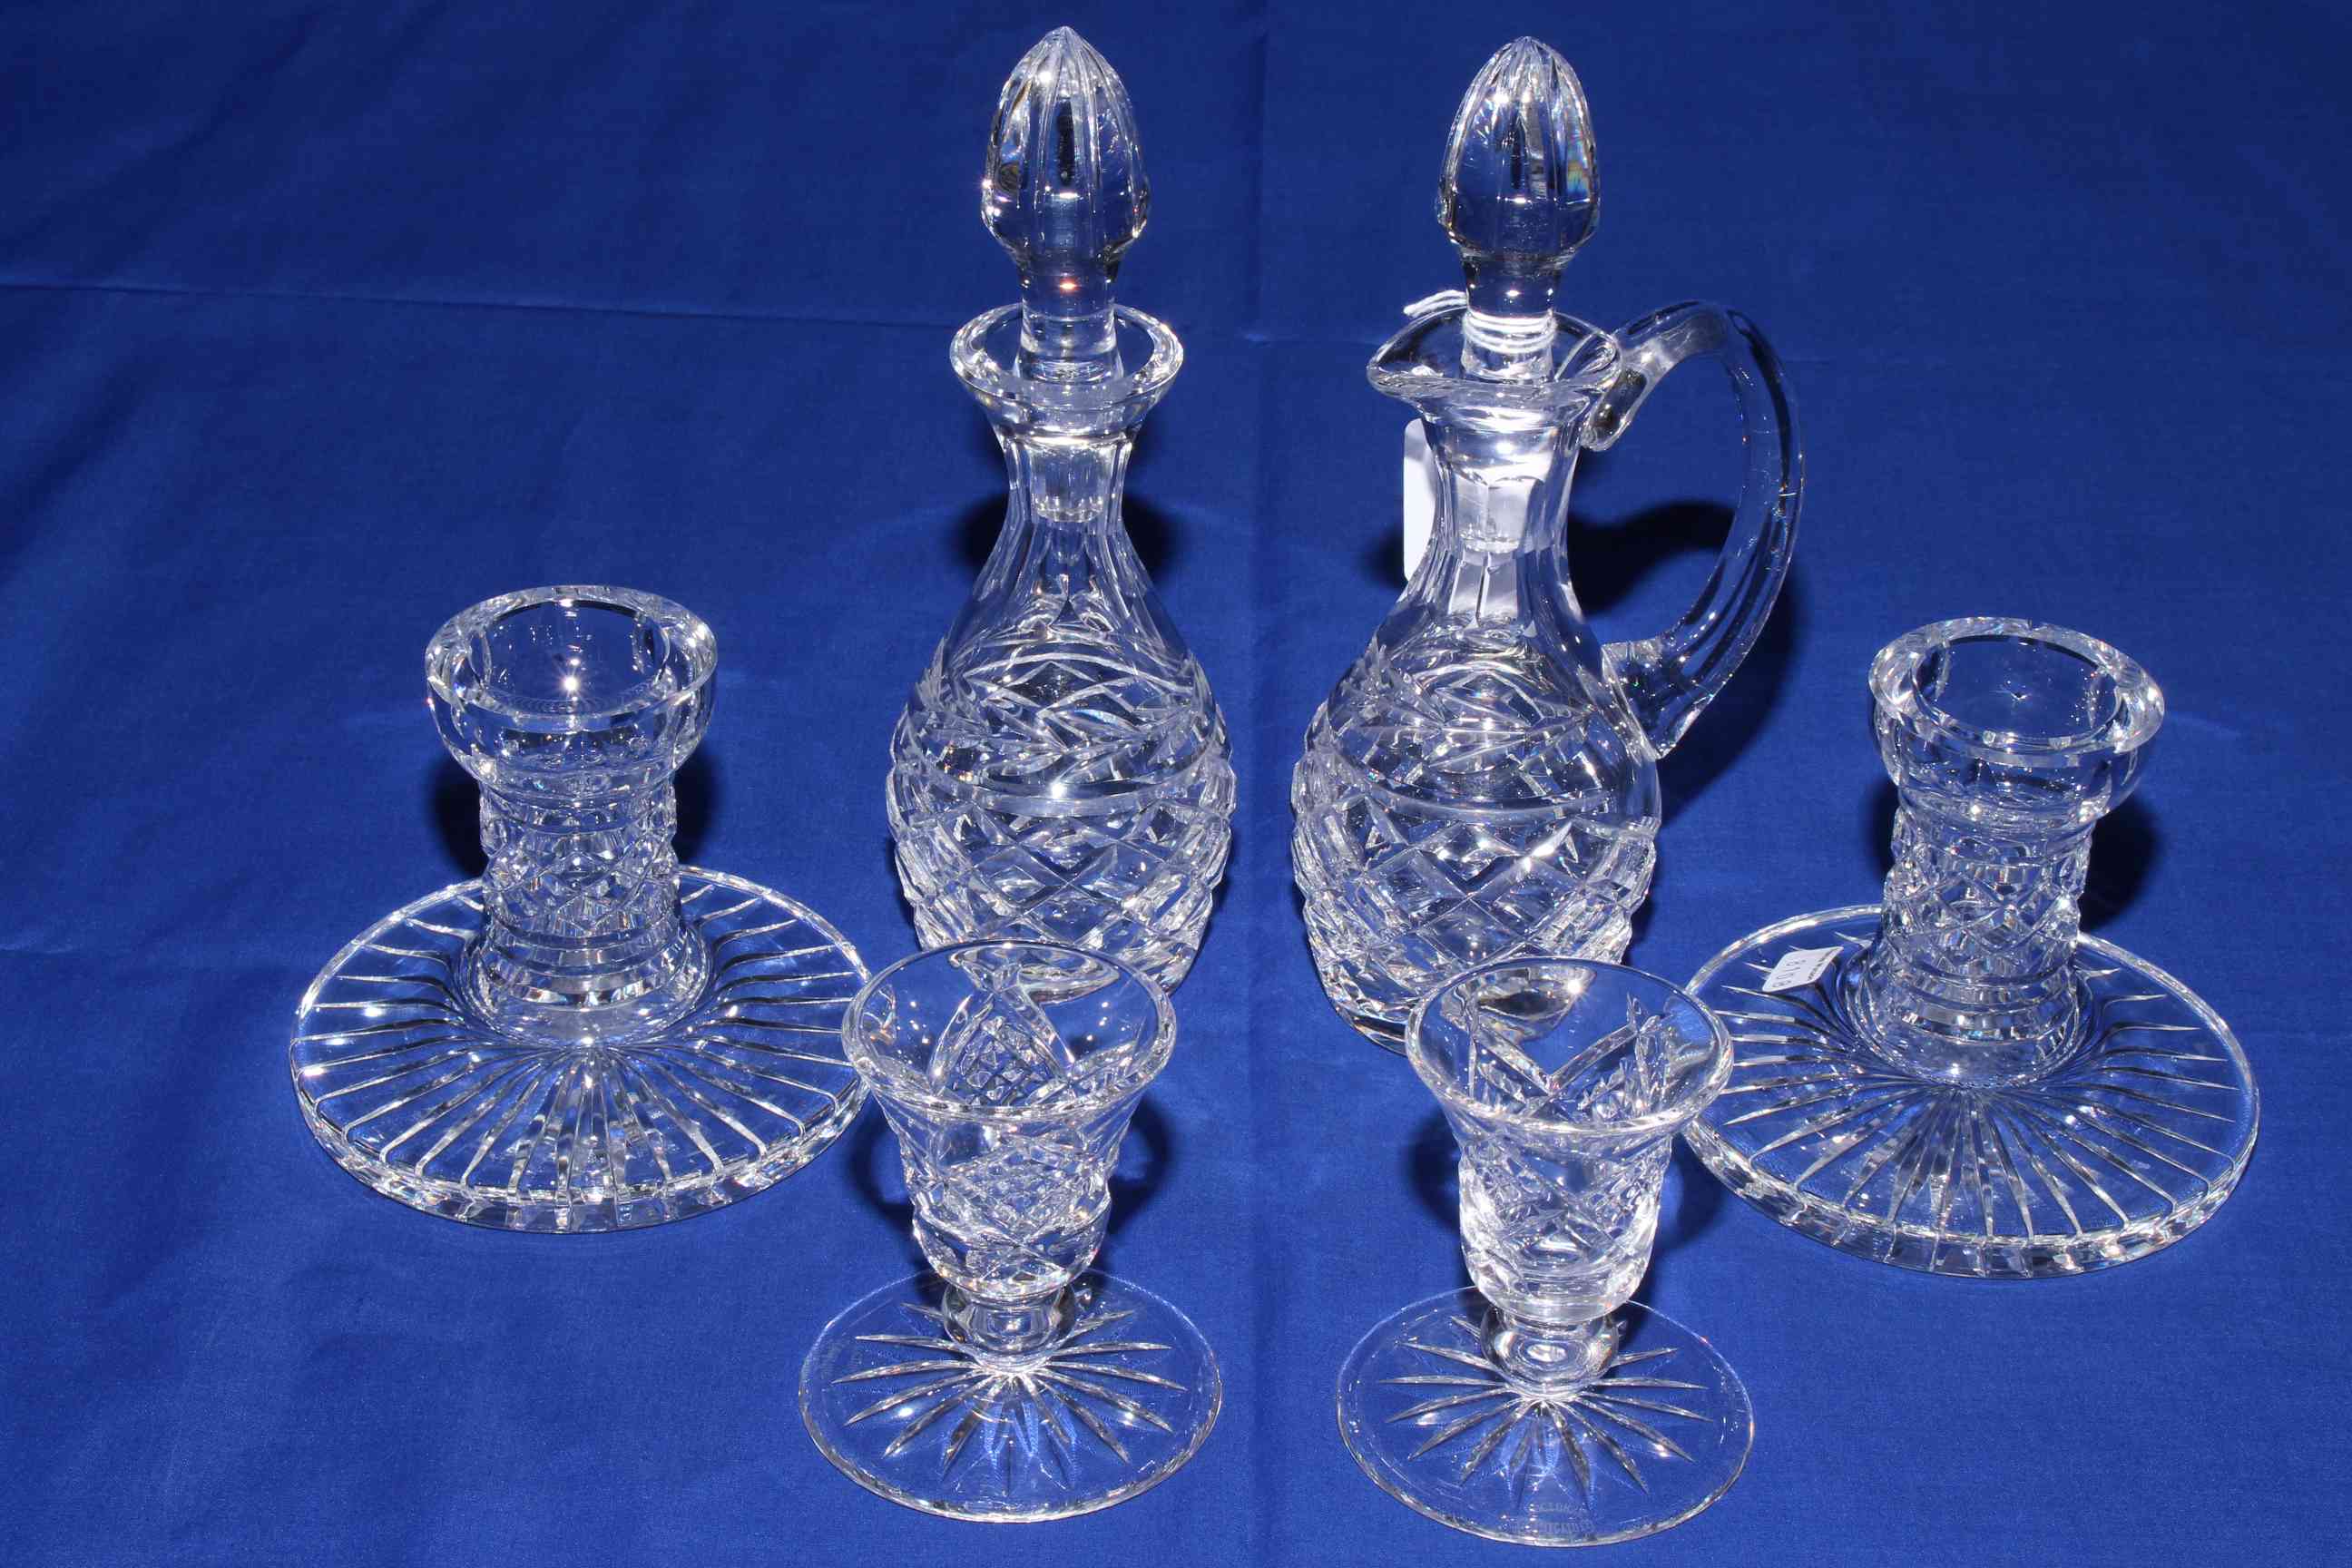 Waterford Crystal vinegar and condiment bottles, two pairs of dwarf candlesticks.